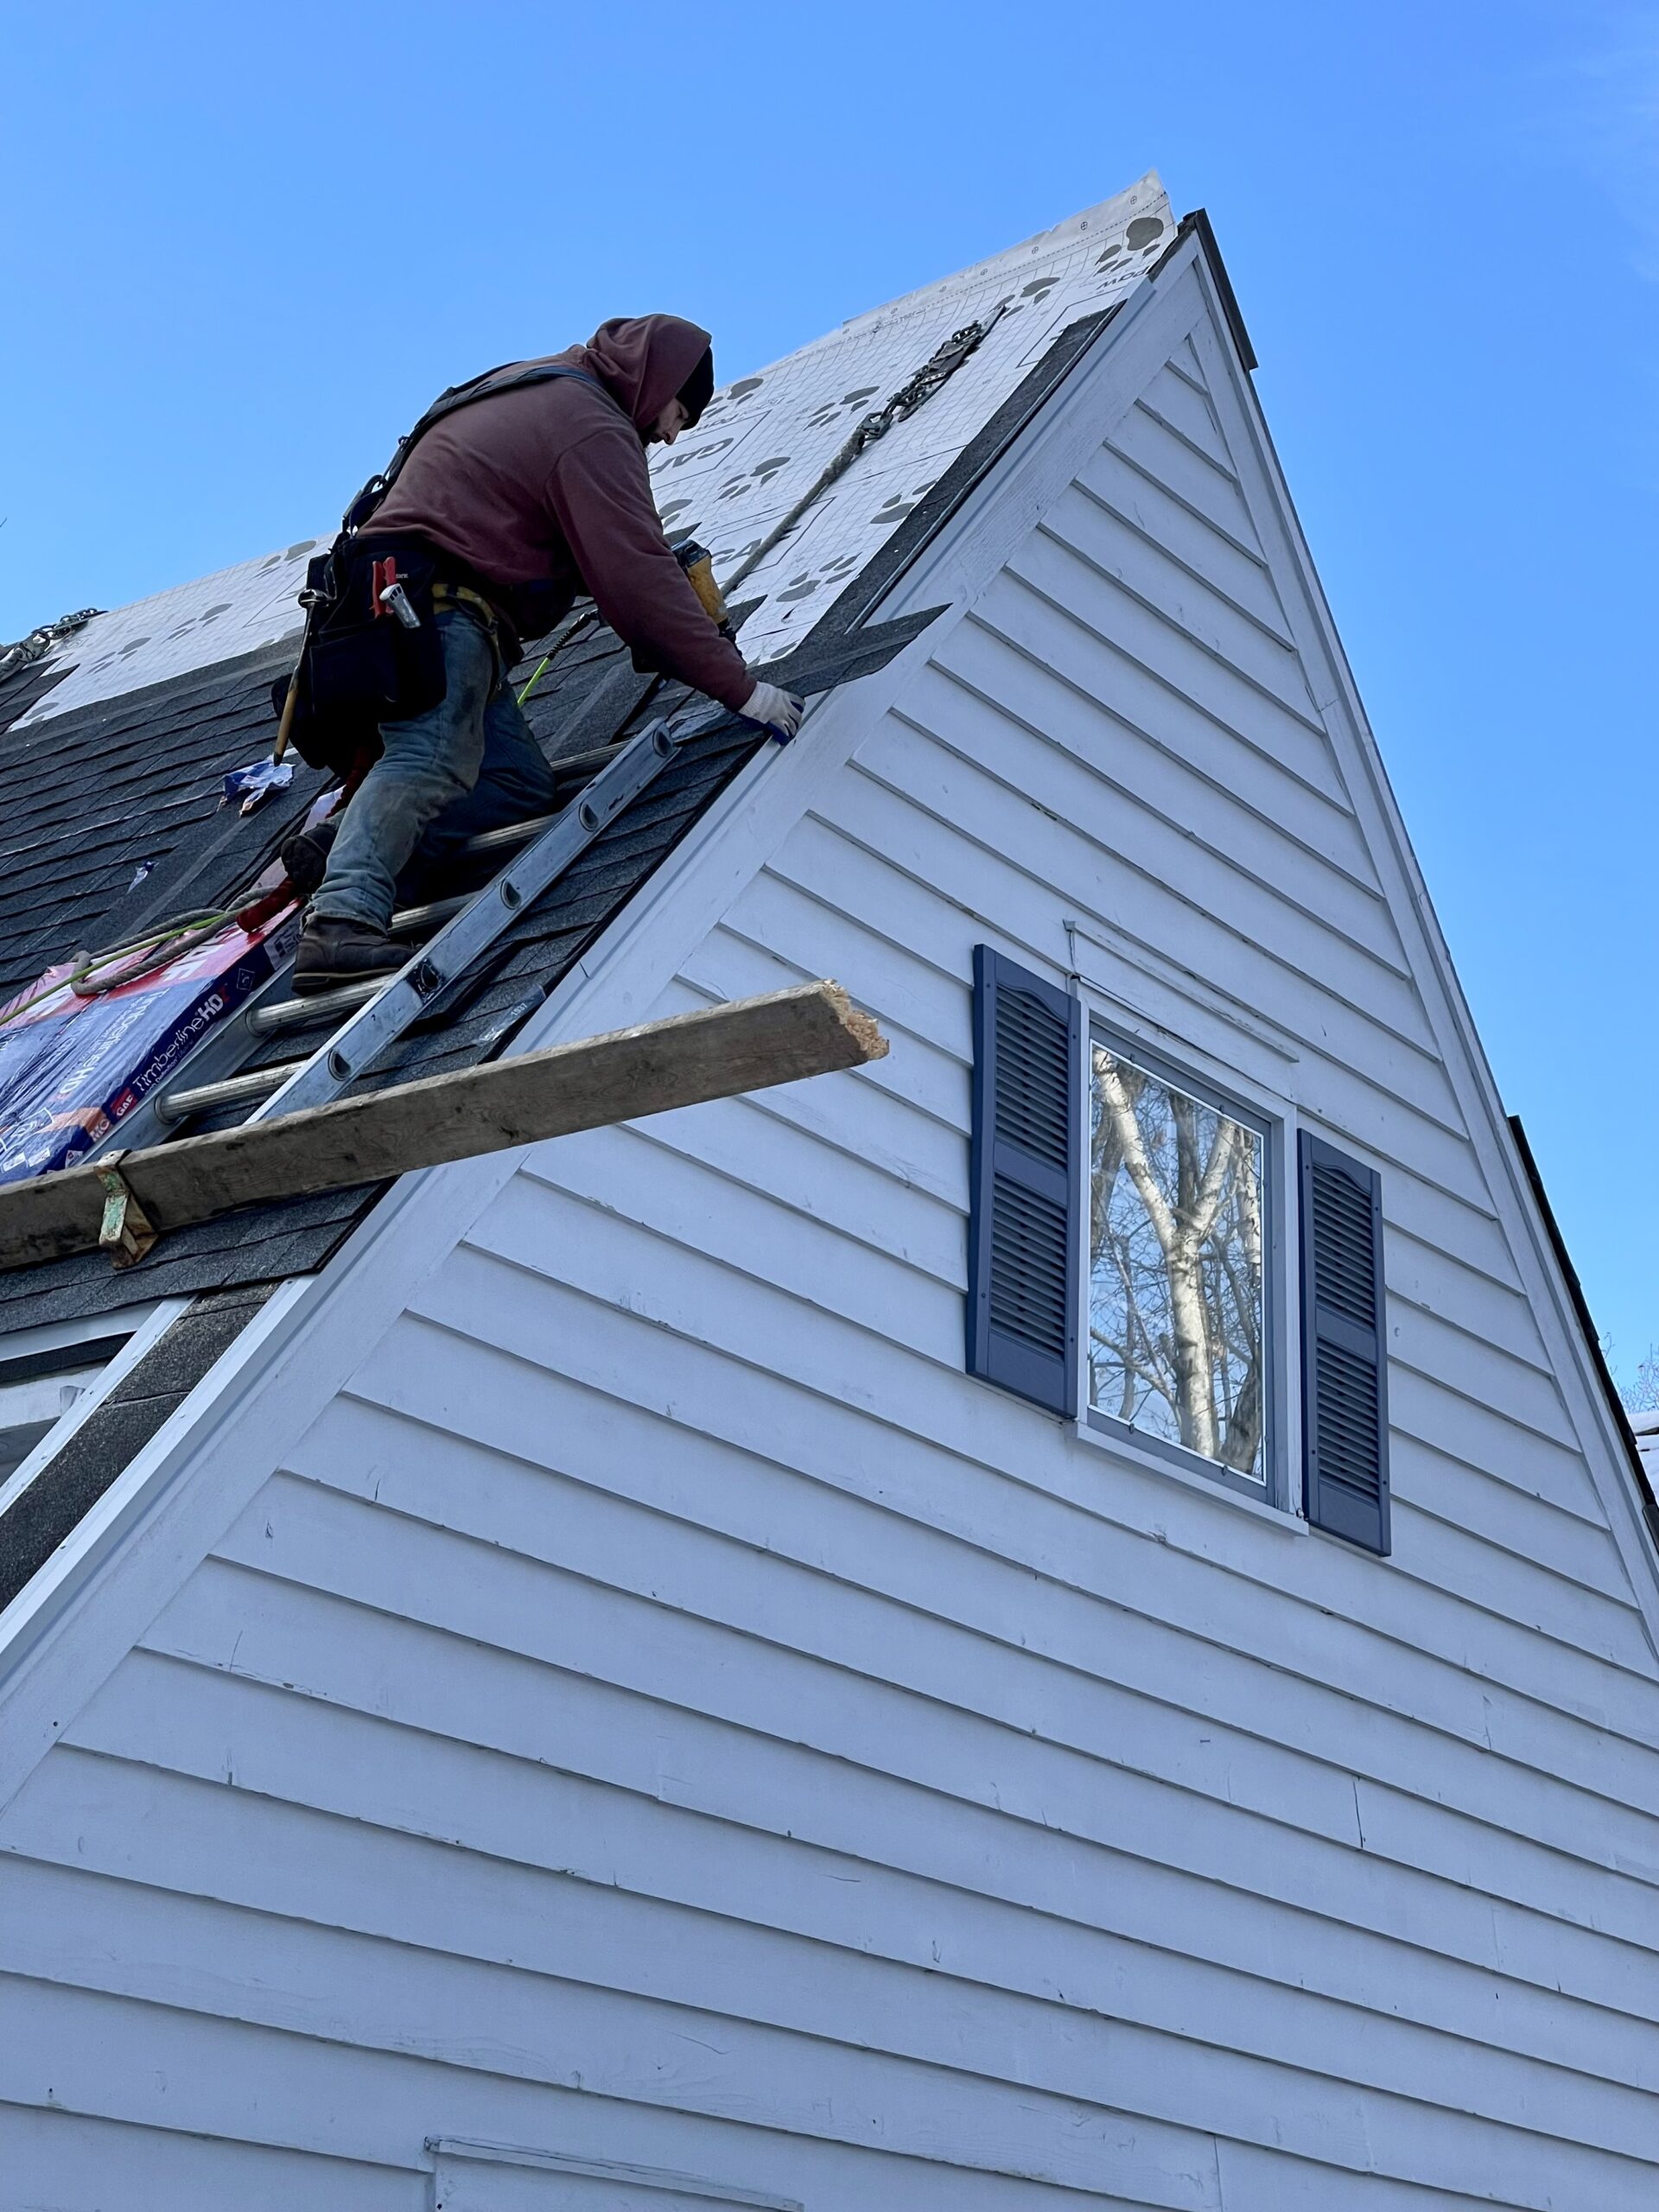 L.H. Krueger and Son employee working on re-roofing a home in Delafield, WI